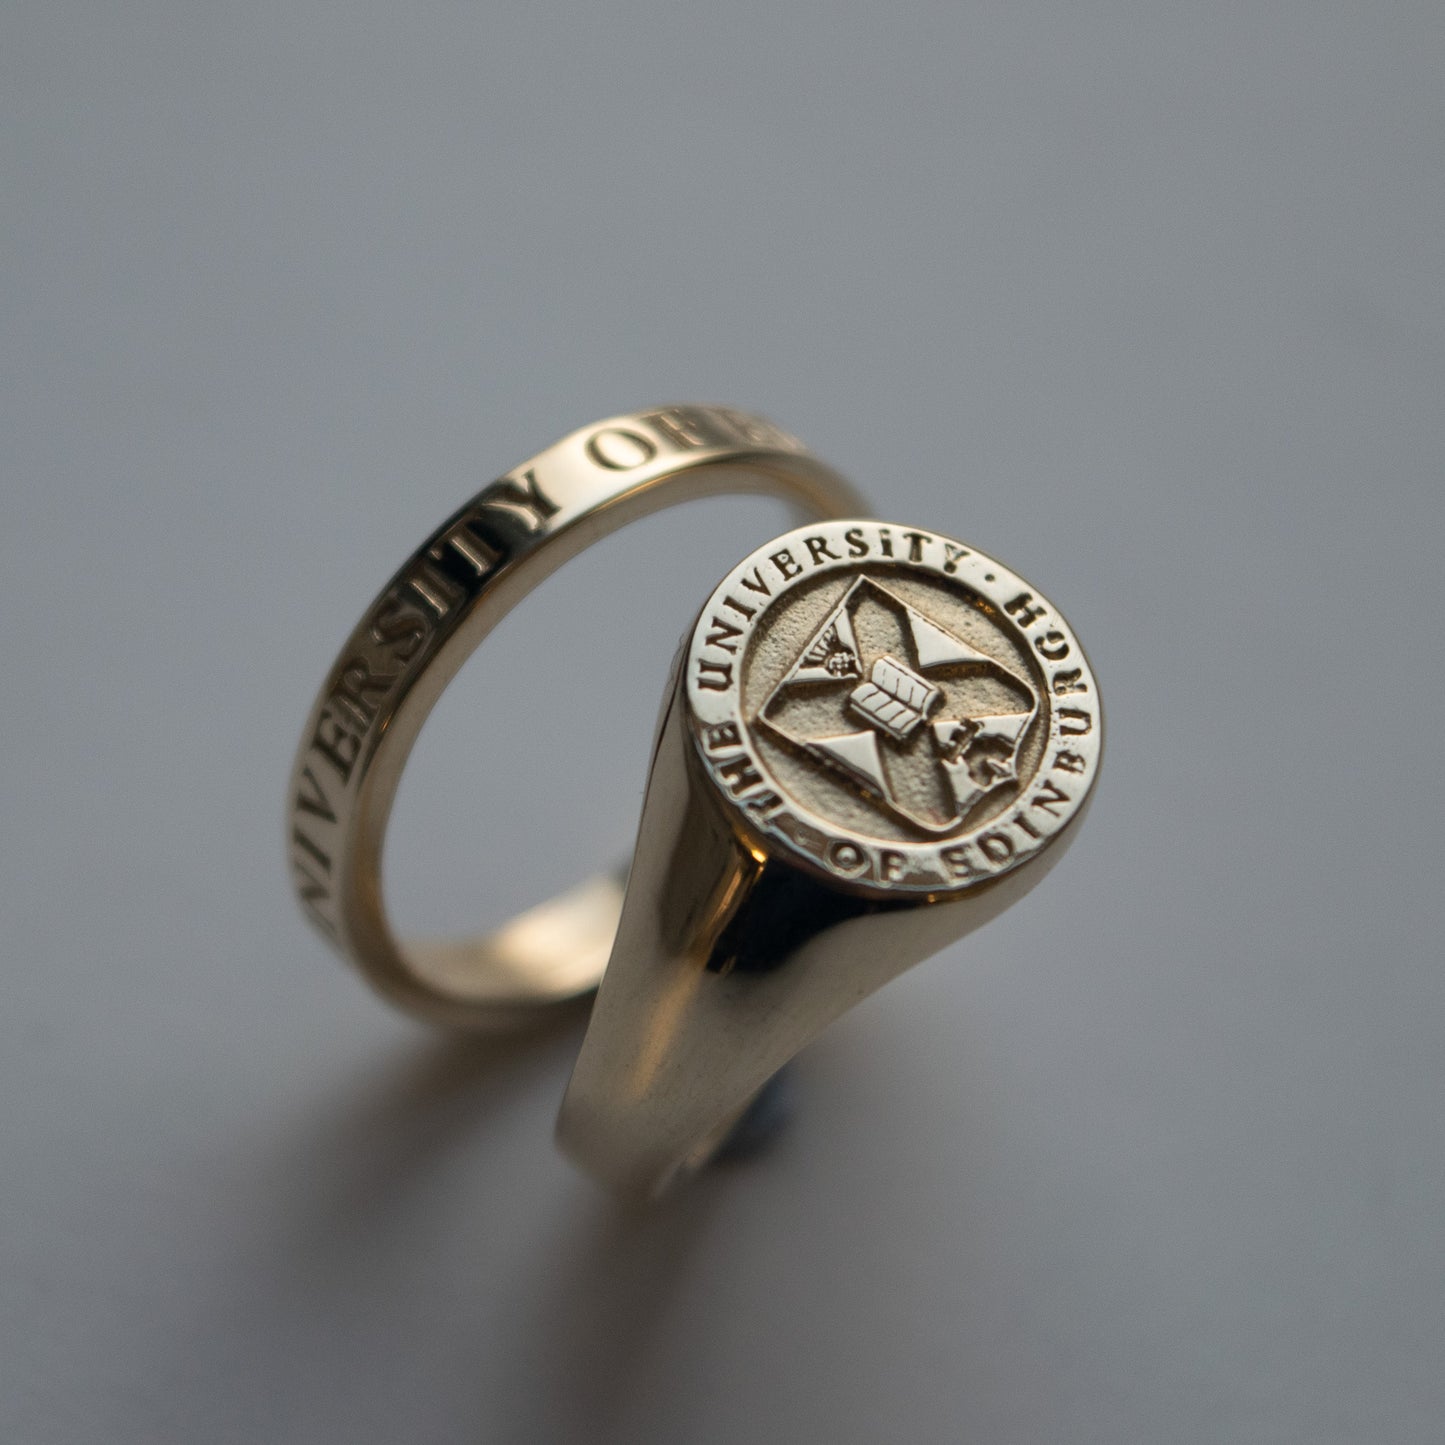 Gold graduation Signet Ring featuring the University crest with thin gold band ring behind